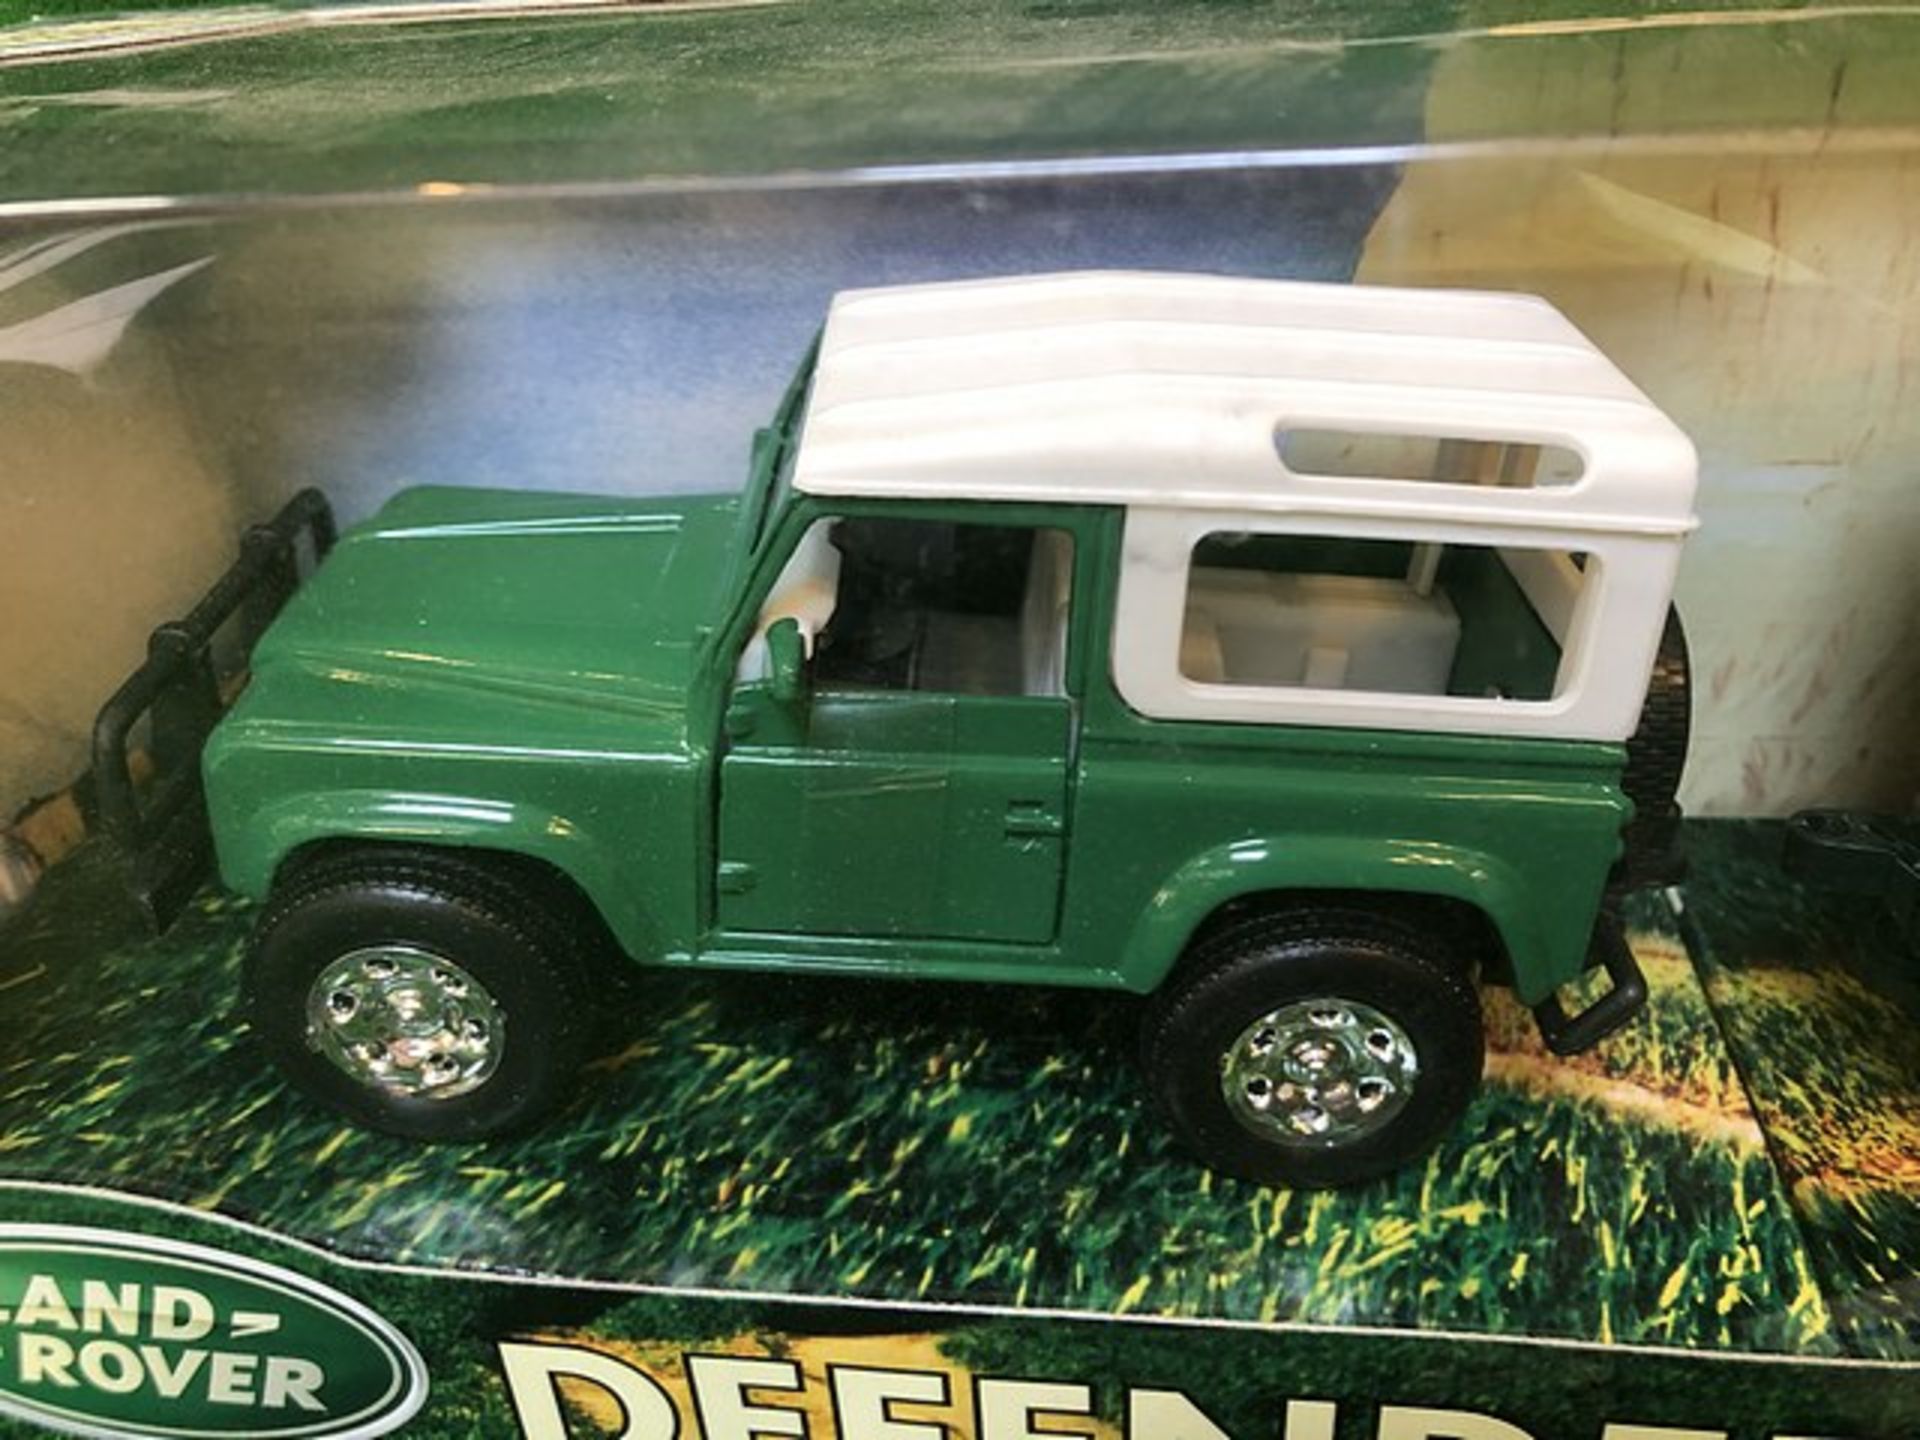 Halsall Diecast Land Rover Defender And Plastic Horse Box With Horse Complete Inbox - Image 3 of 3